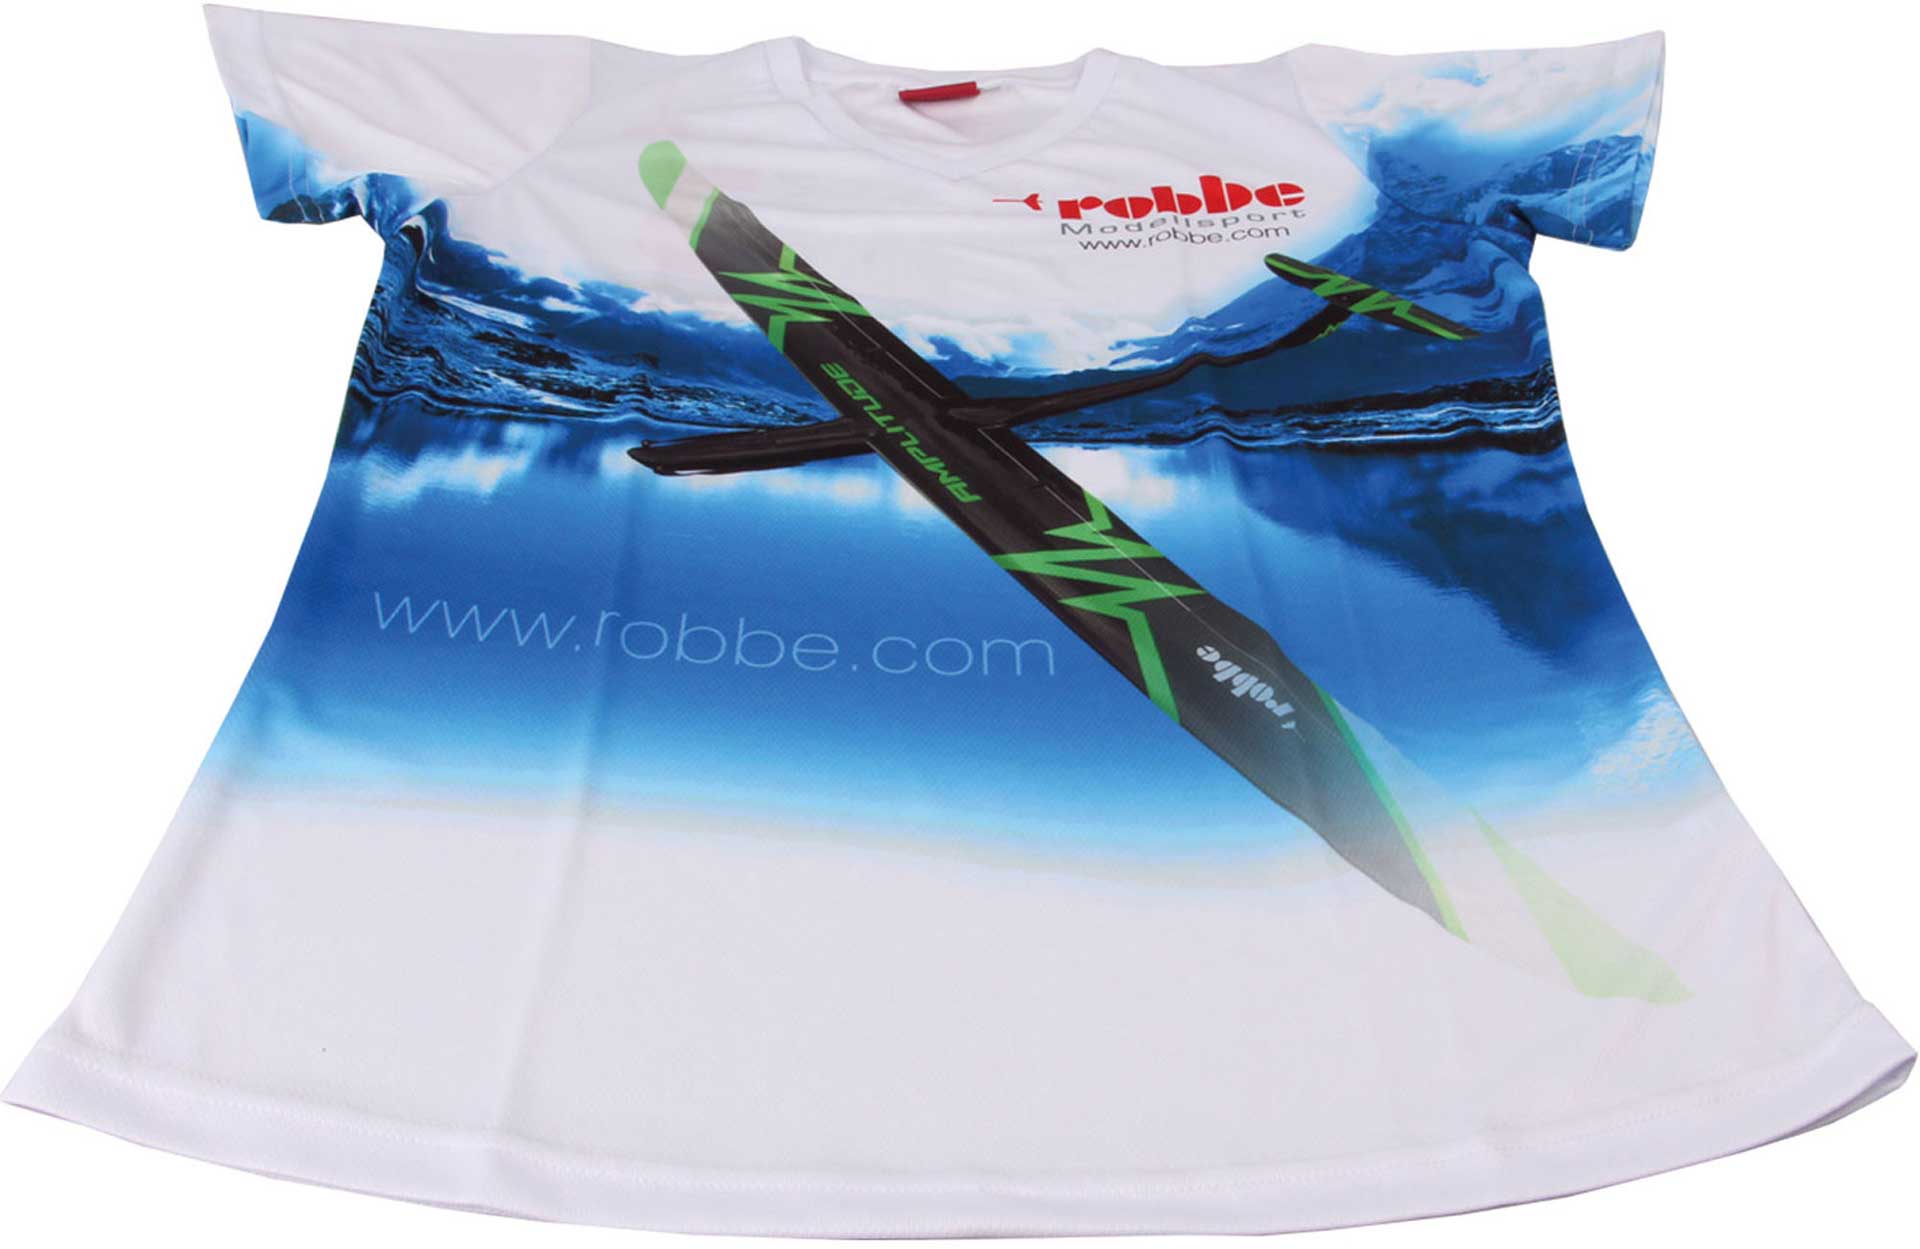 Robbe Modellsport T-SHIRT "AMPLITUDE" ROBBE TAILLE L